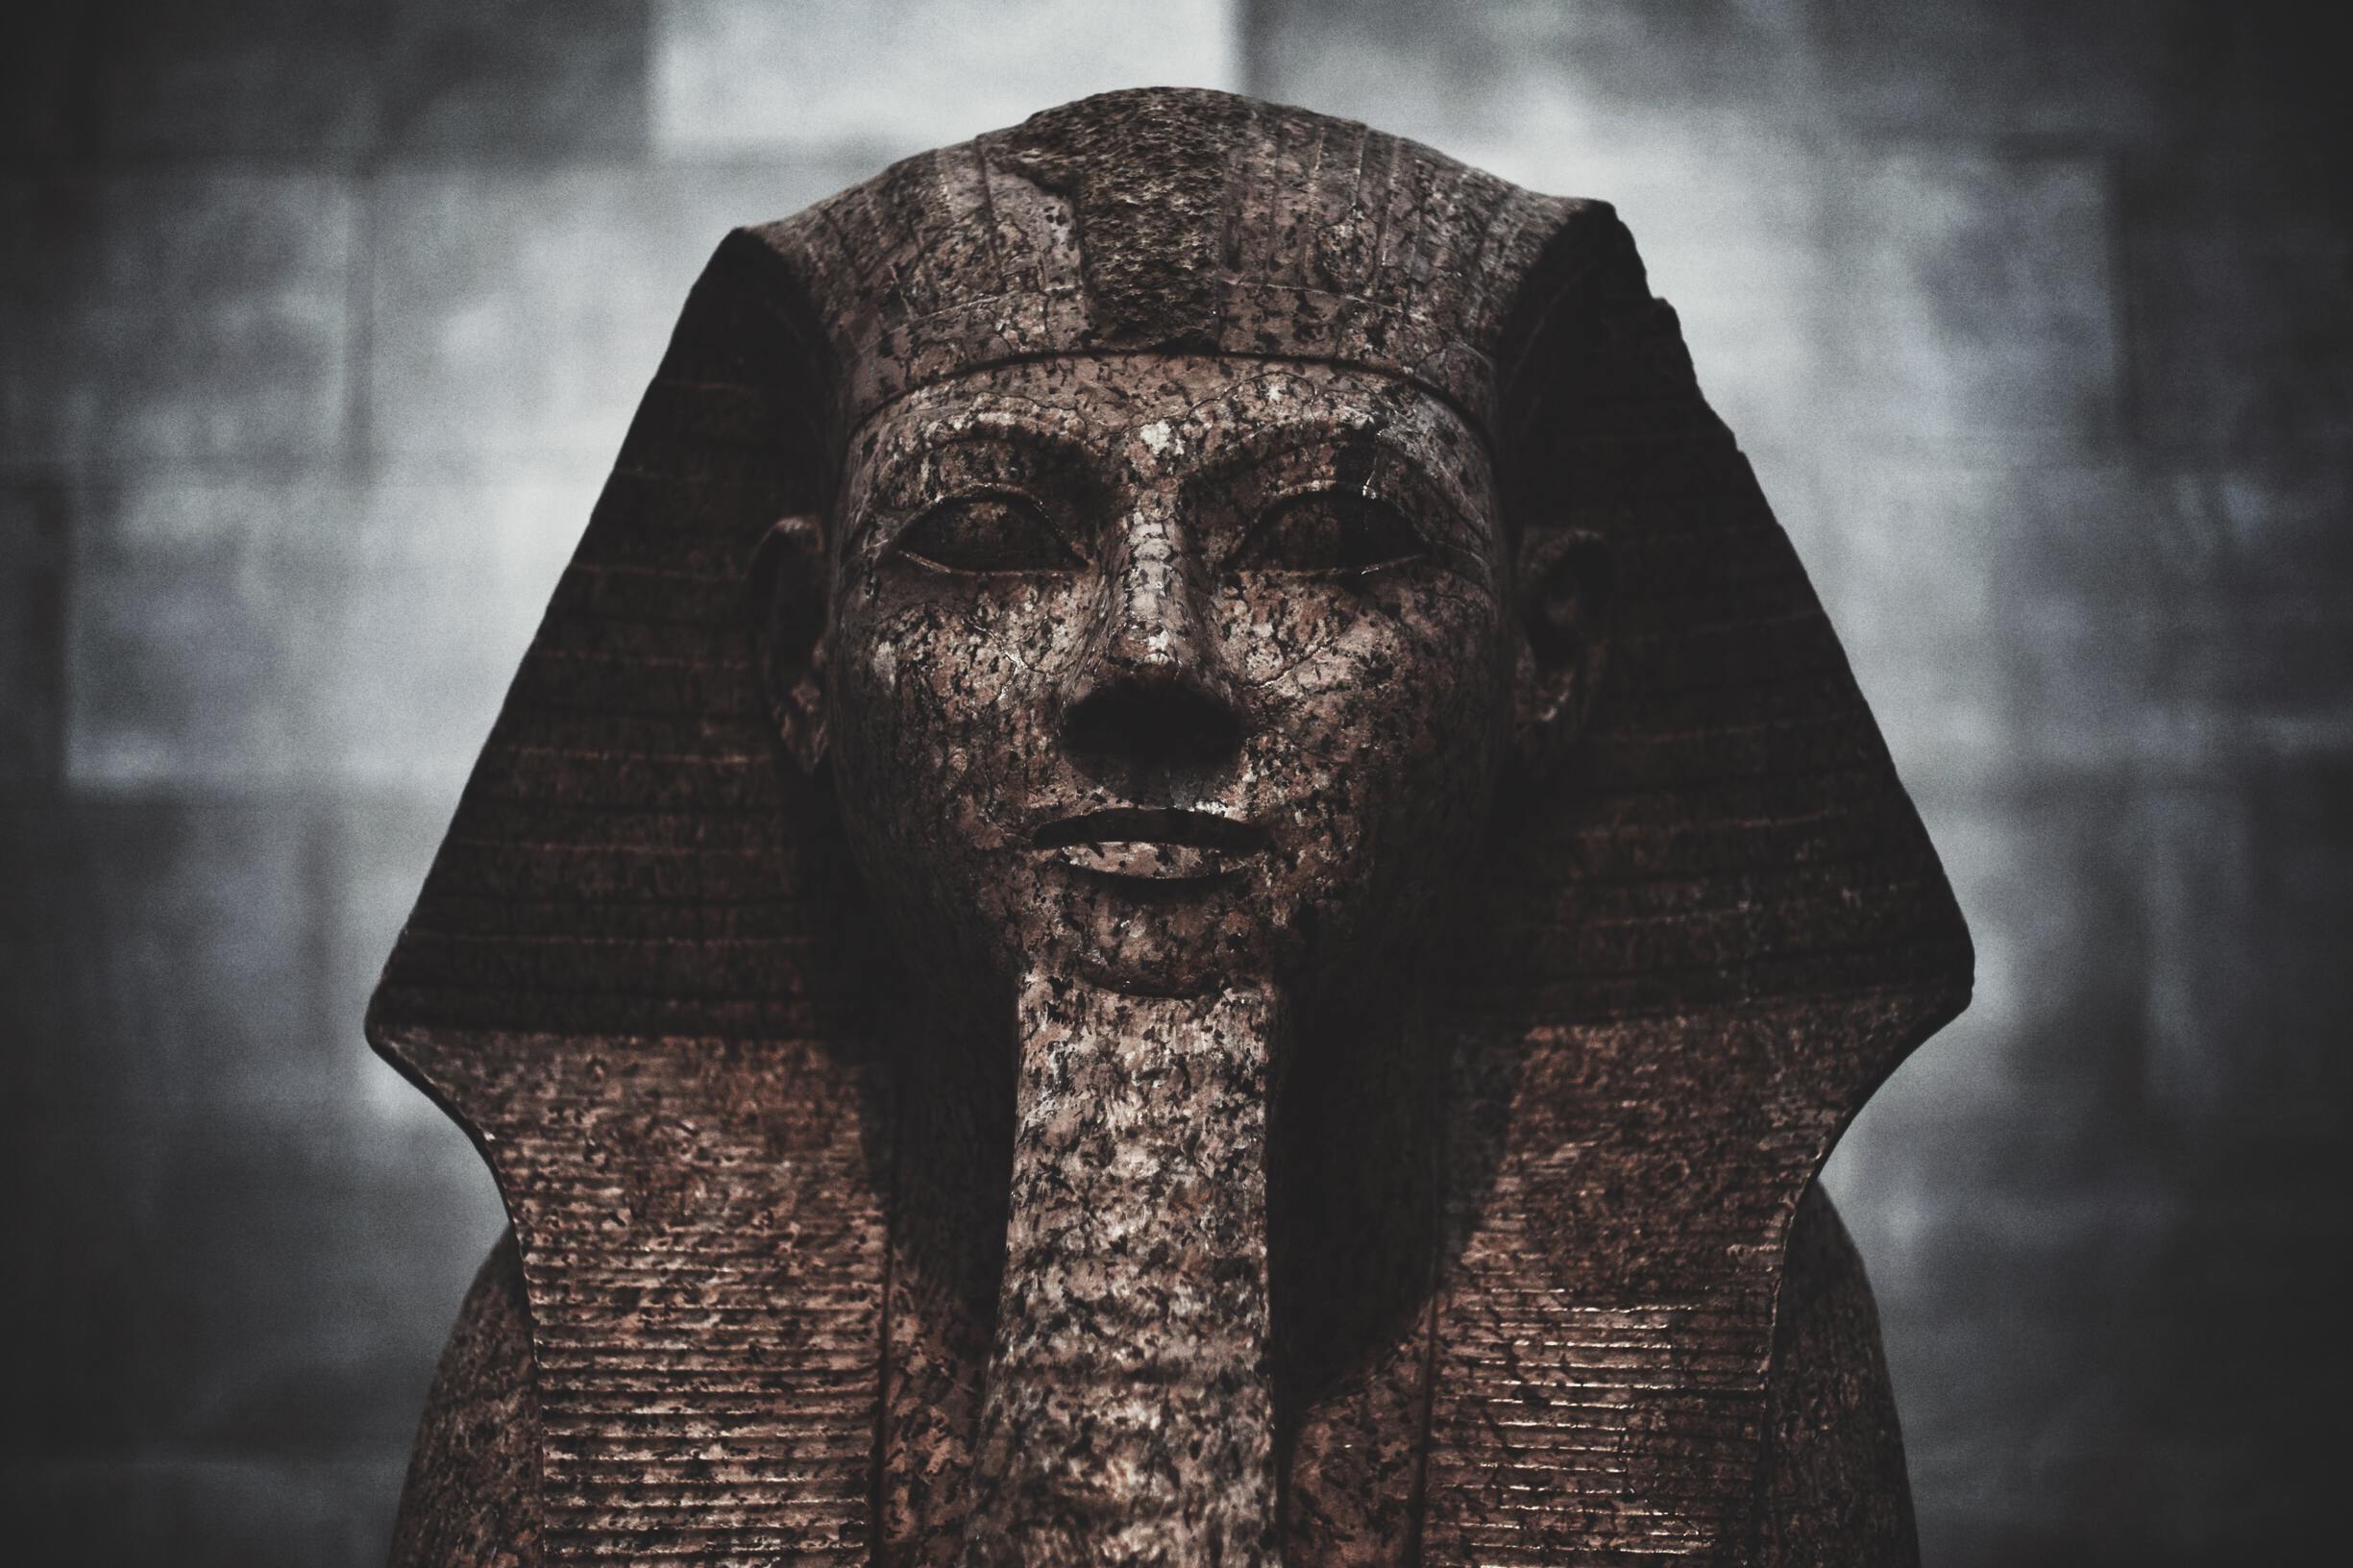 Sphinx guarding the tomb of King Sarcophagus